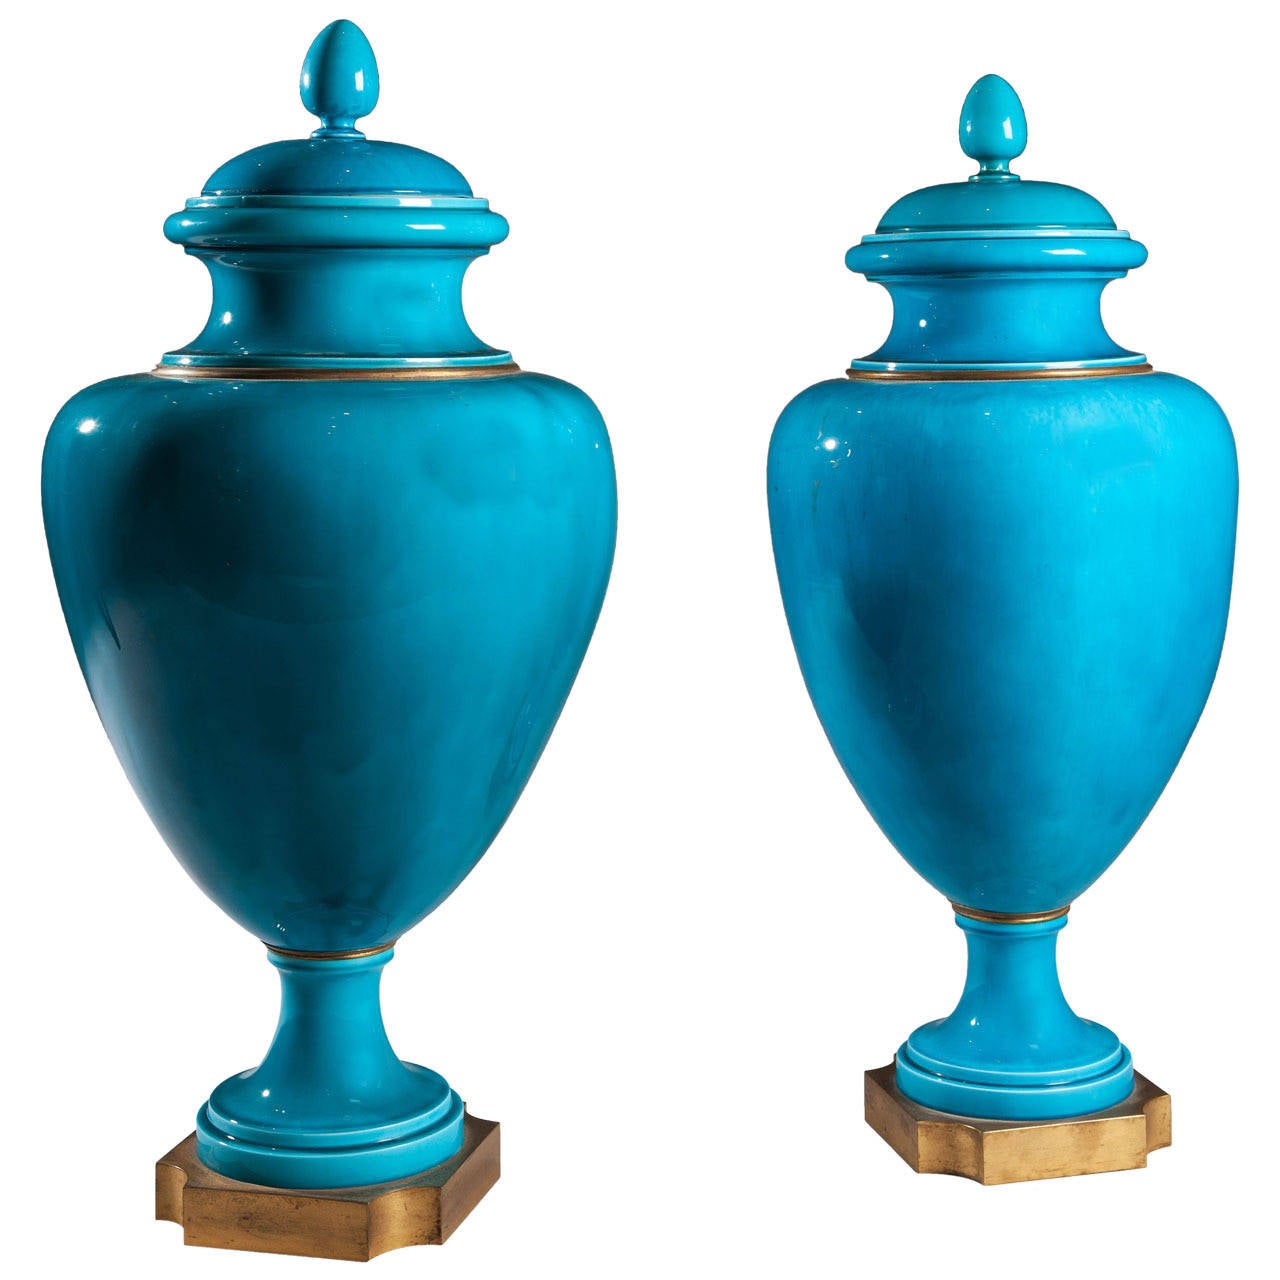 A pair of large-scale turquoise blue vases and covers of baluster form, raised on gilt bronze bases.

These vases are known as Paris vases as recorded at RMN-Grand Palais (Sèvres, Cité de la céramique).